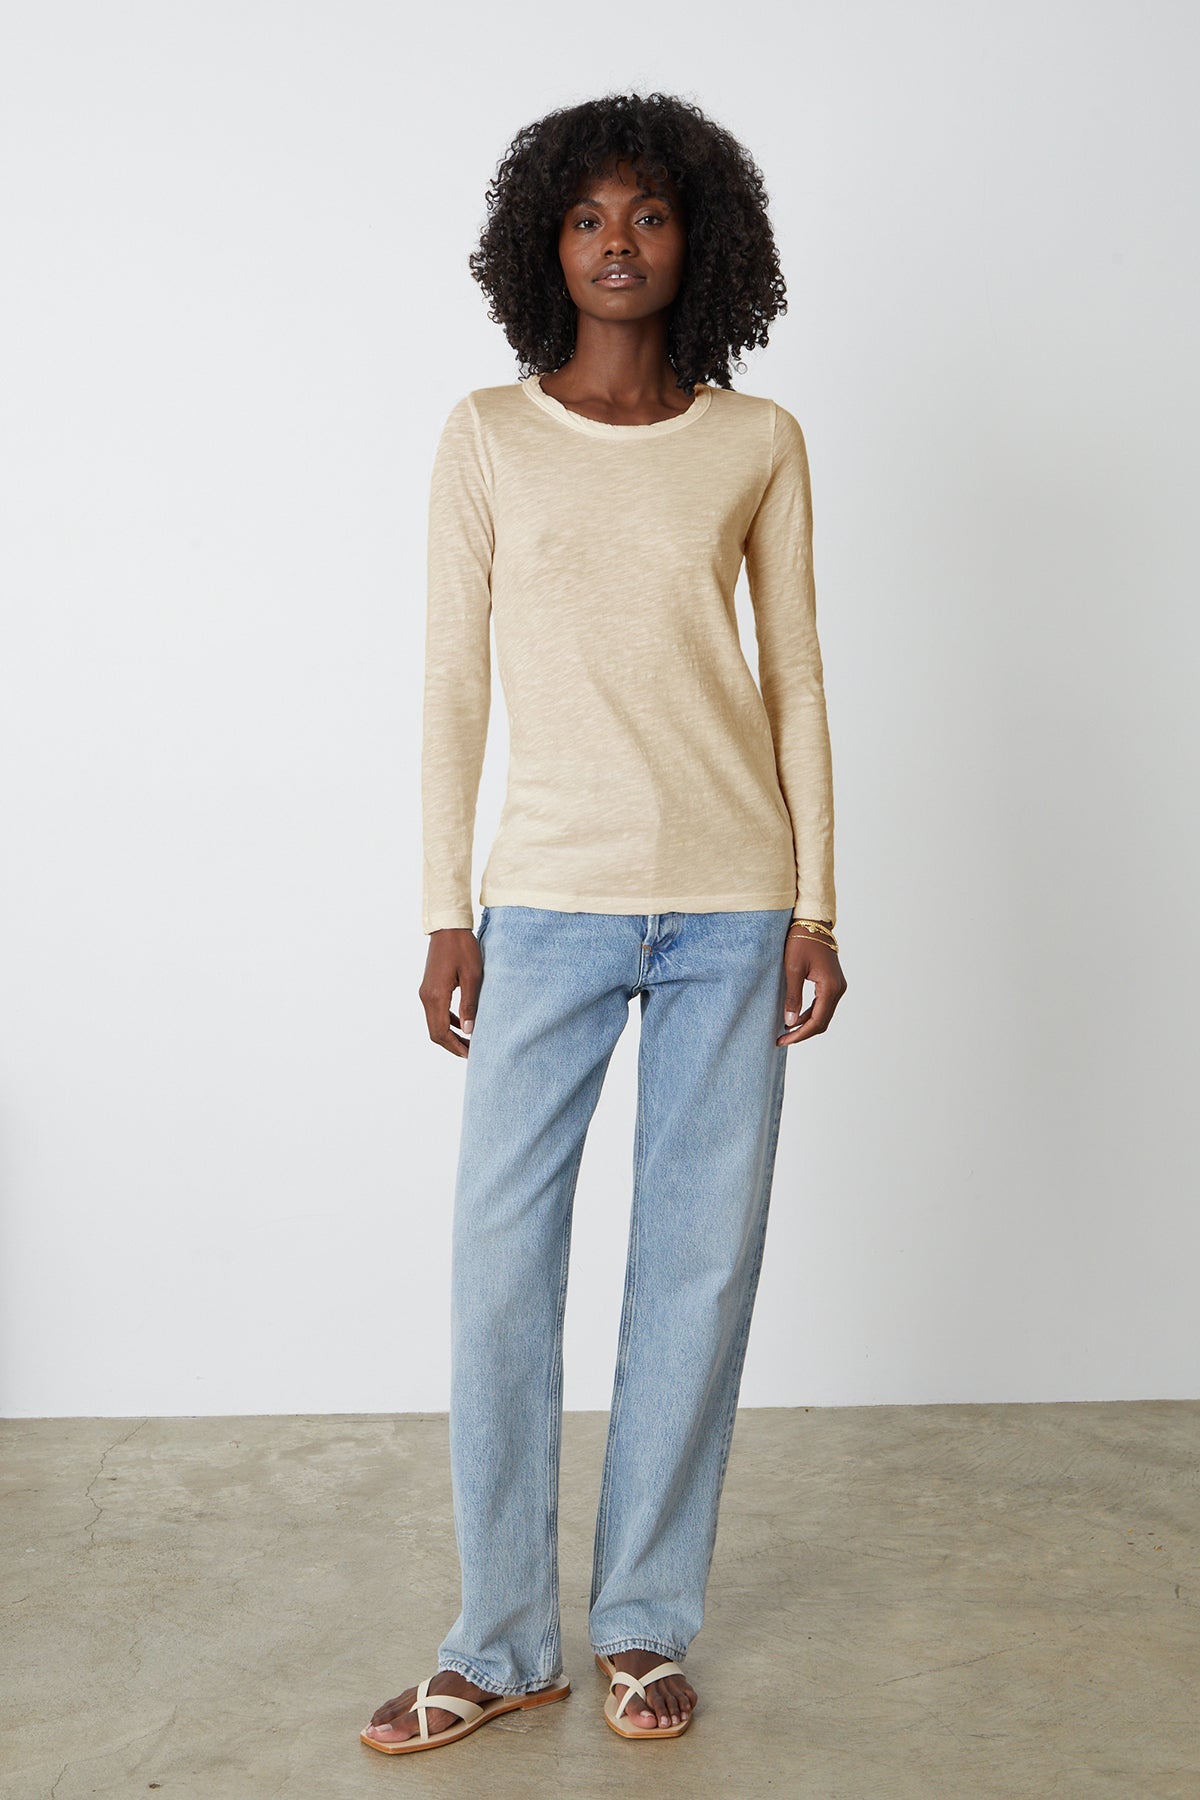   Lizzie long sleeve tee in sesame with light blue denim and flat sandals full length front 